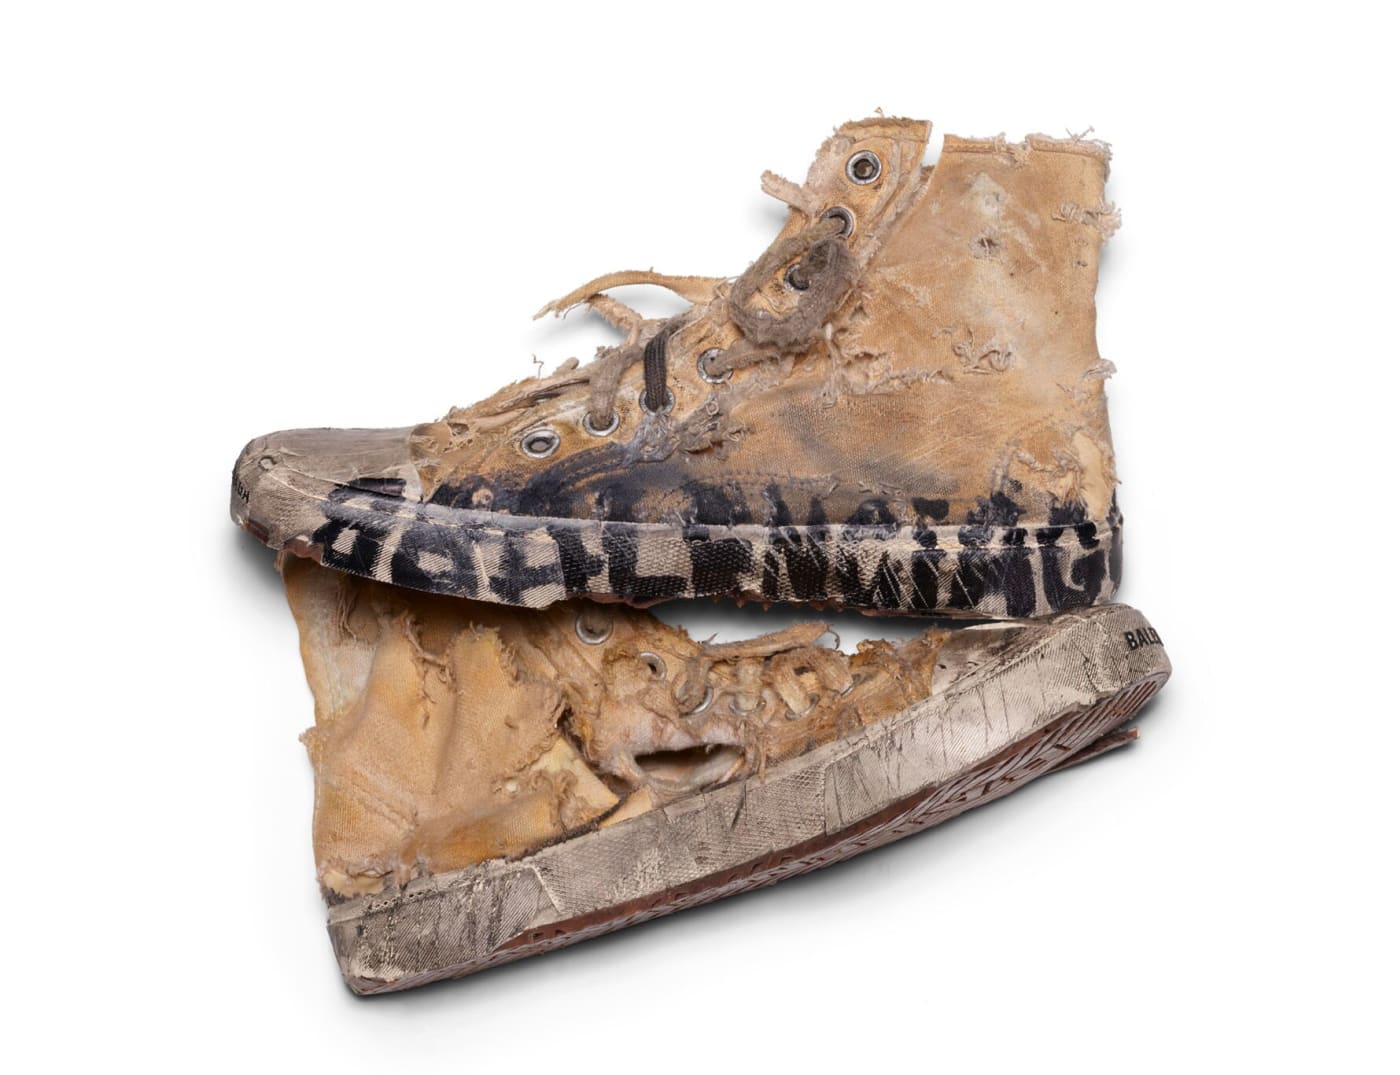 Luxury Brand Sells $1,850 “Fully-Destroyed” Sneakers